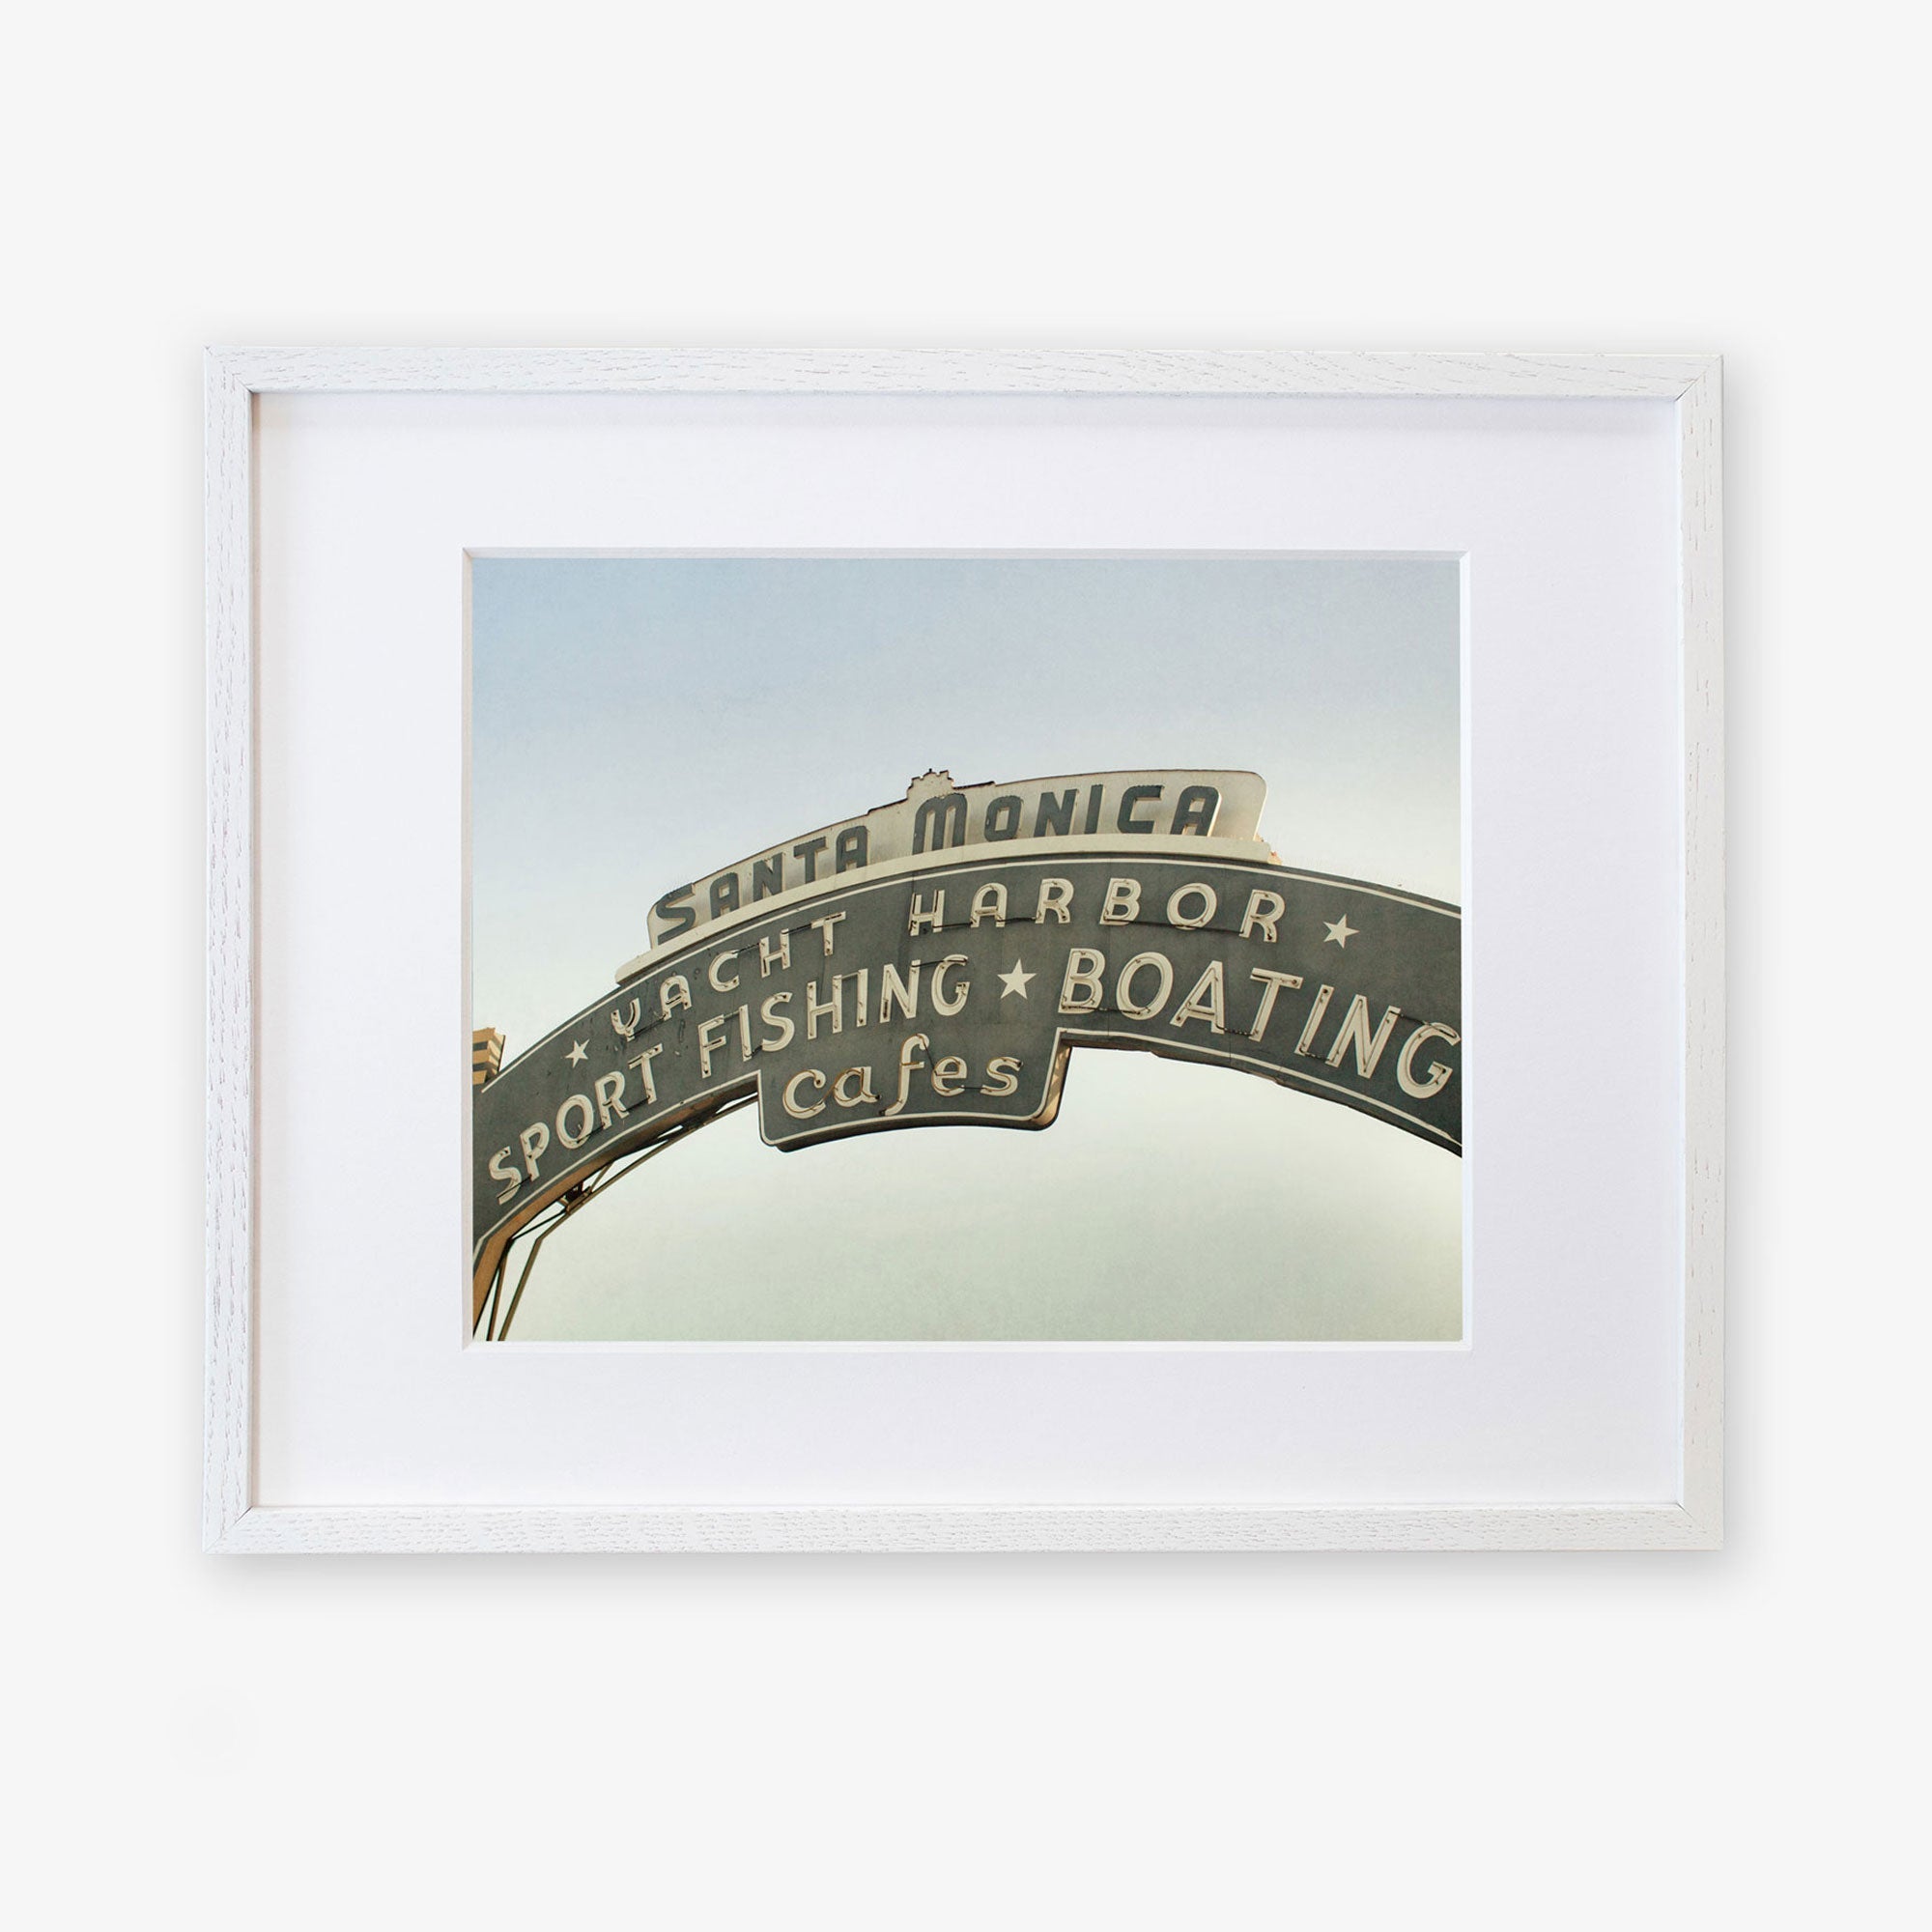 A framed archival photographic print of the Los Angeles California Print, &#39;Santa Monica Pier Blues&#39; by Offley Green, featuring text and symbols related to sport fishing, boating, and cafes on a clear day.